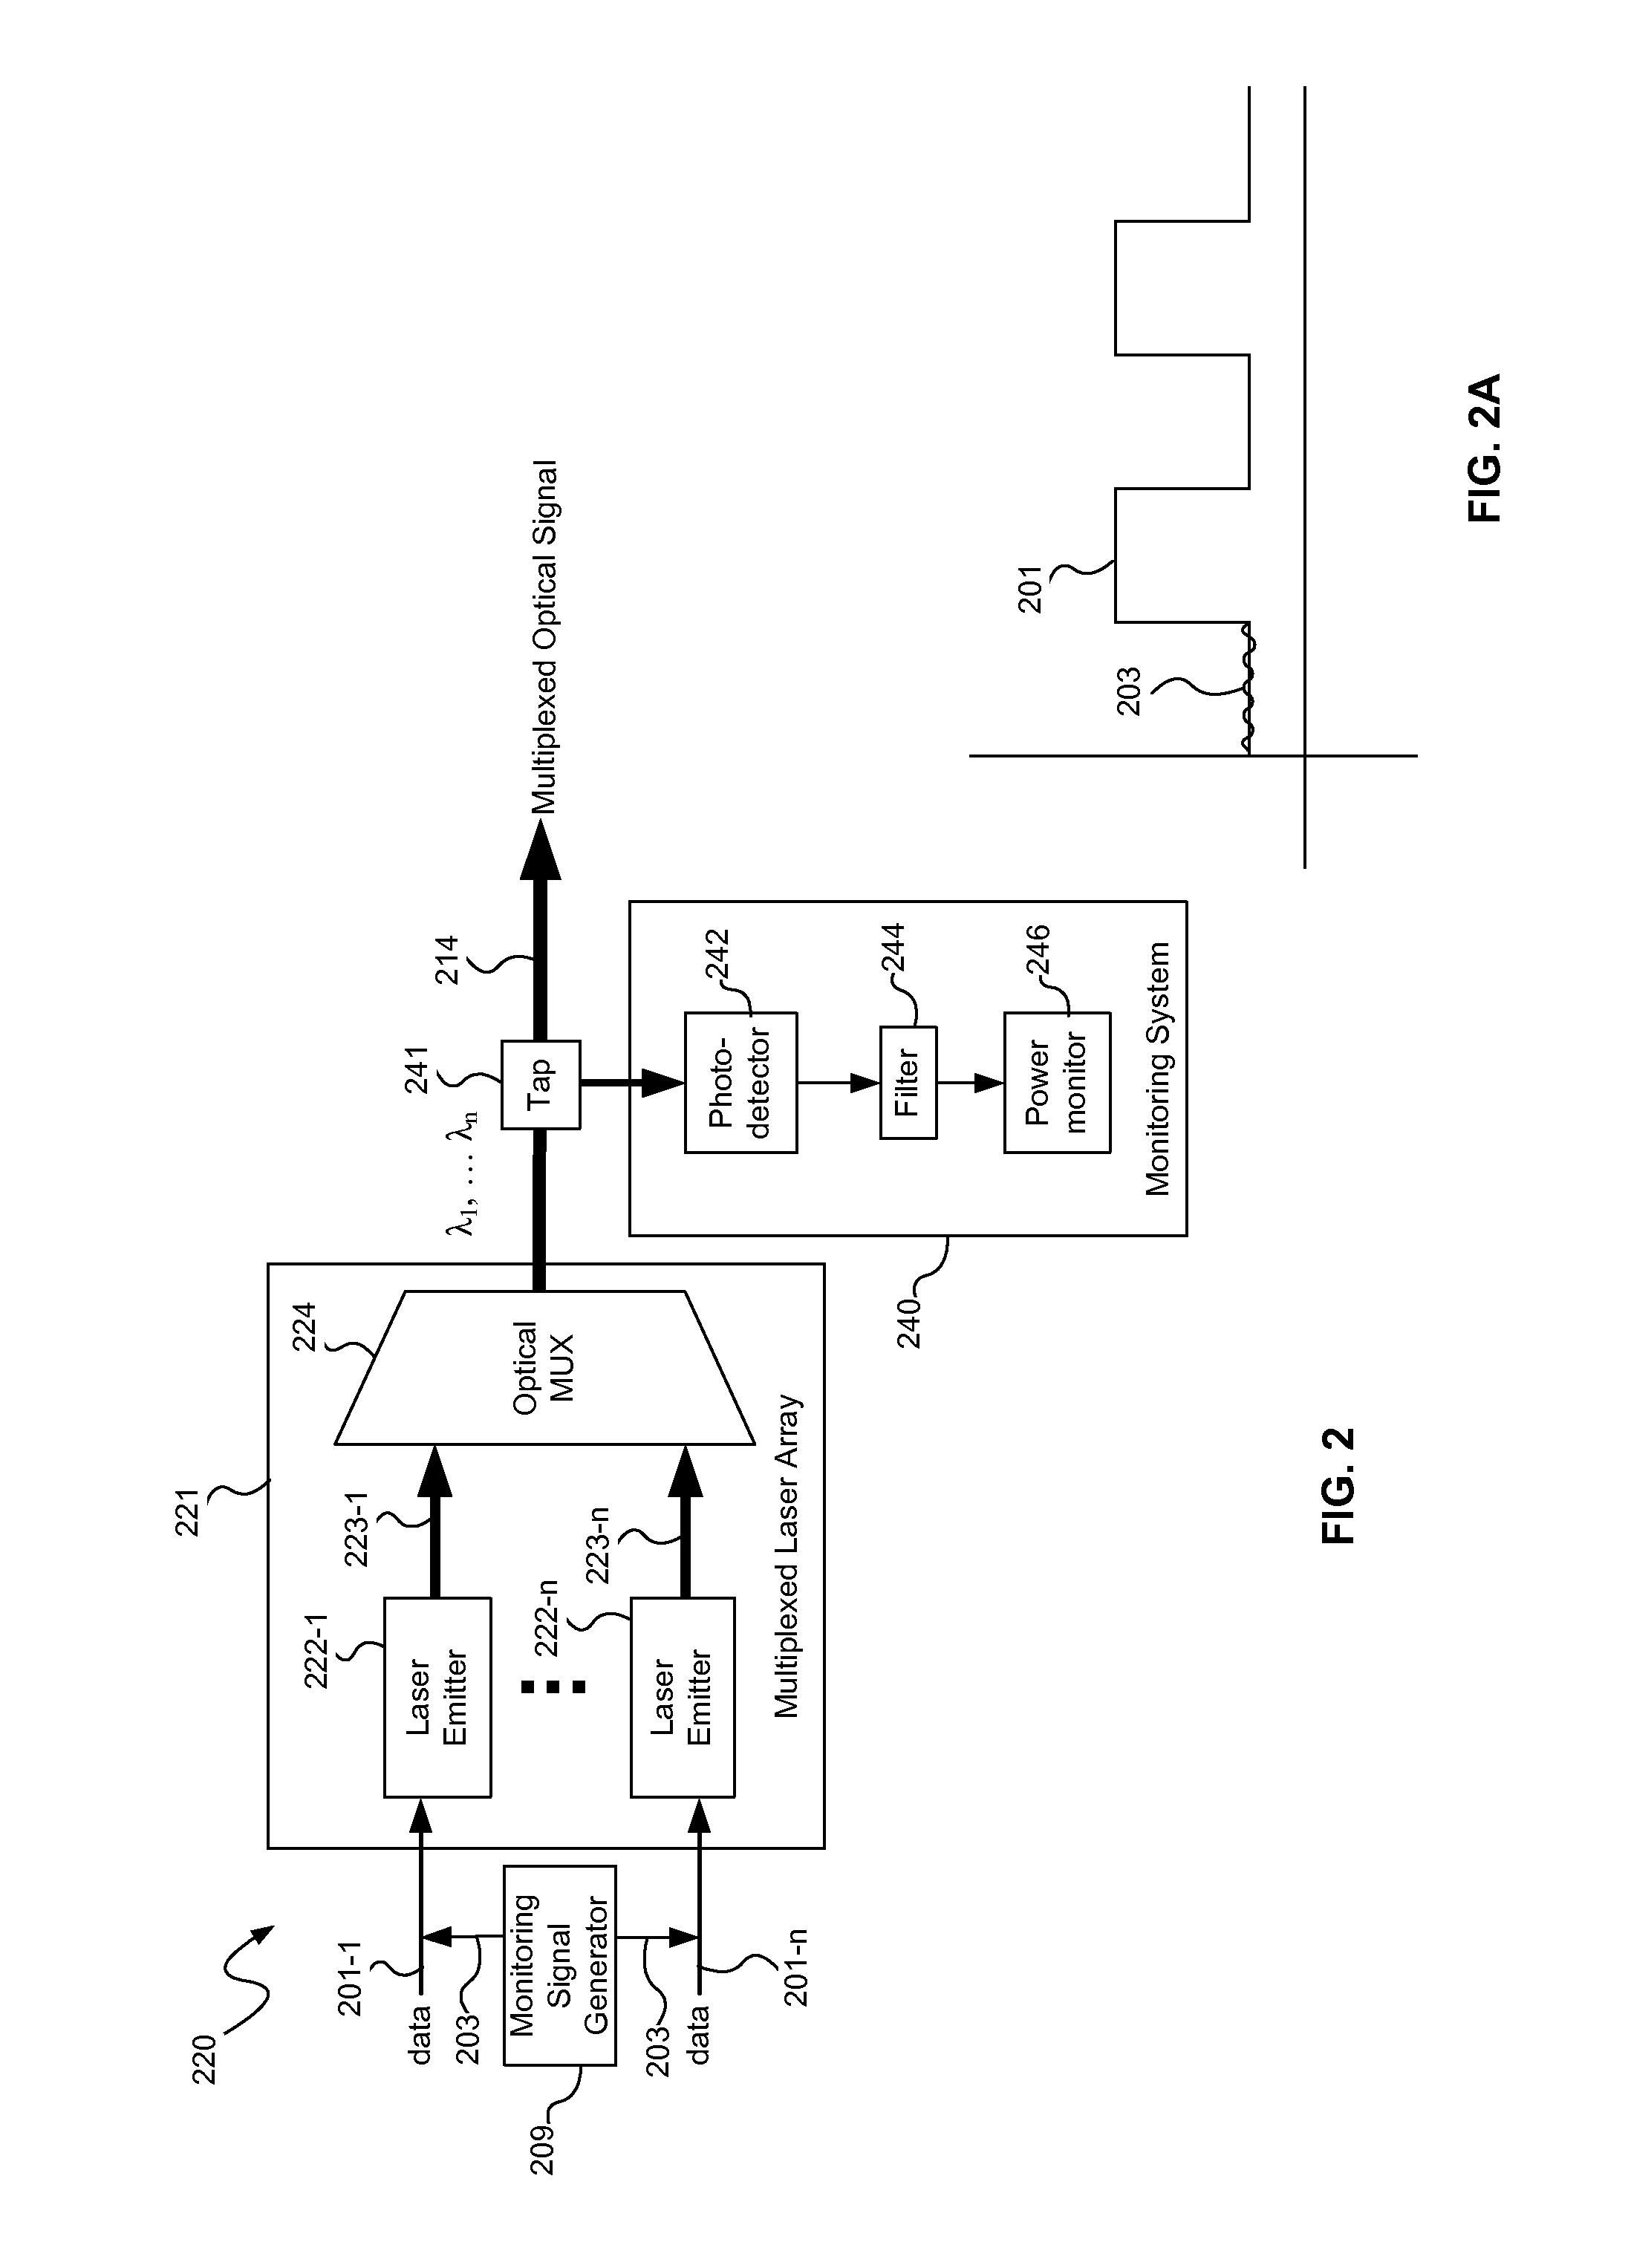 Monitoring a multiplexed laser array in an optical communication system